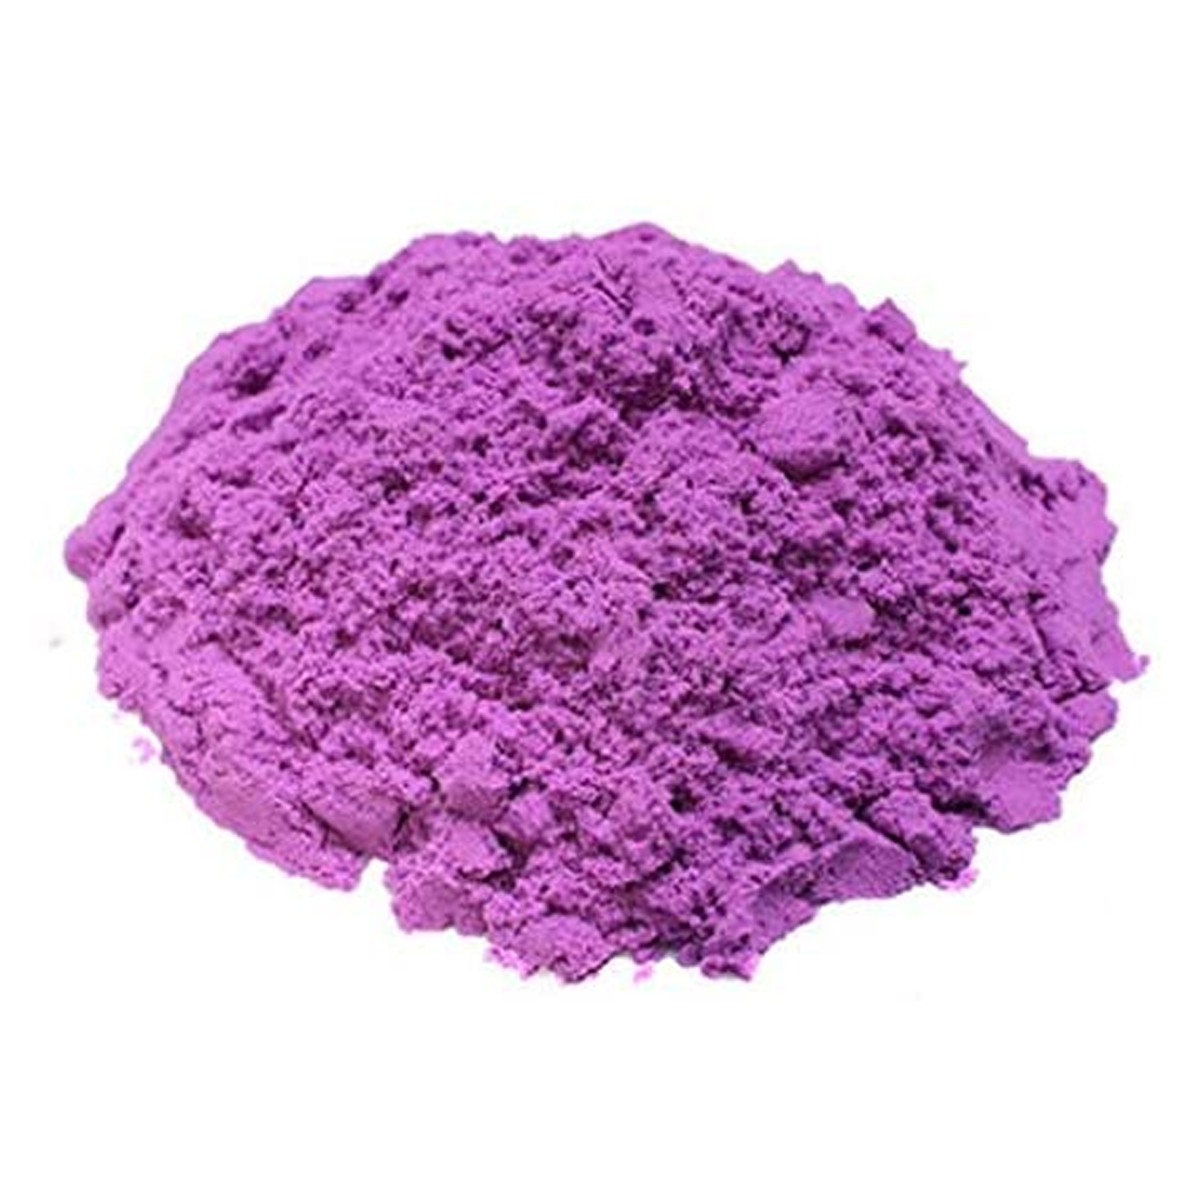 Magic Sand Toy Set with Modeling Tools (2 Kg) - Purple